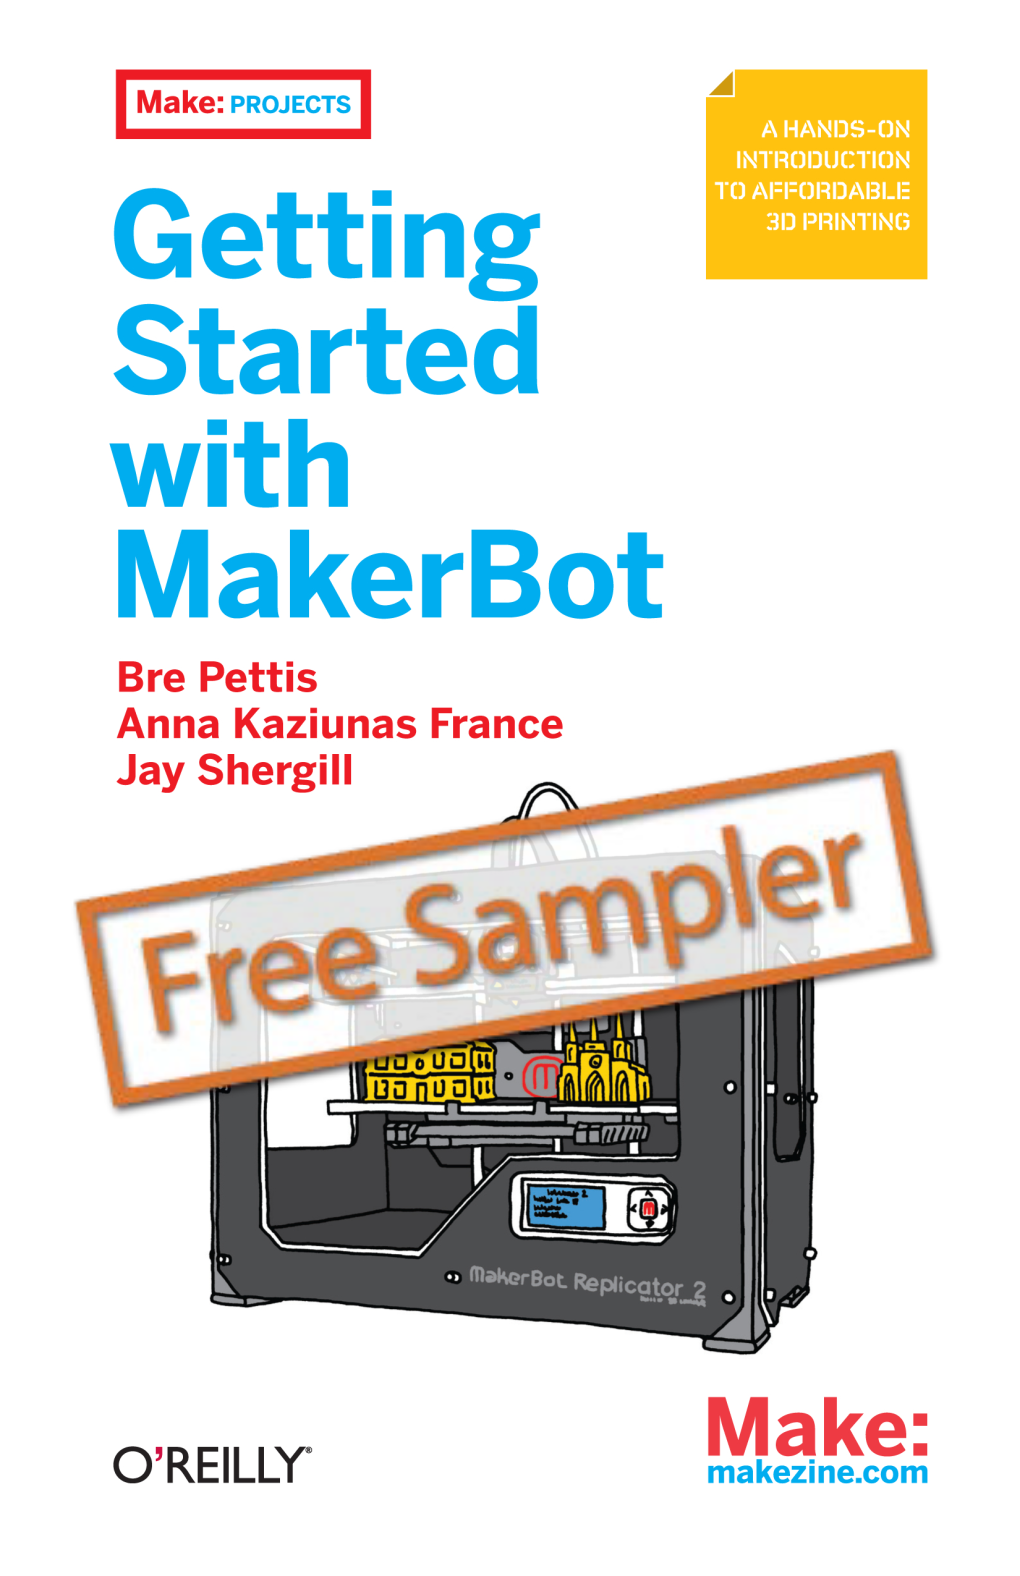 Getting Started with Makerbot by Bre Pettis, Anna Kaziunas France, and Jay Shergill